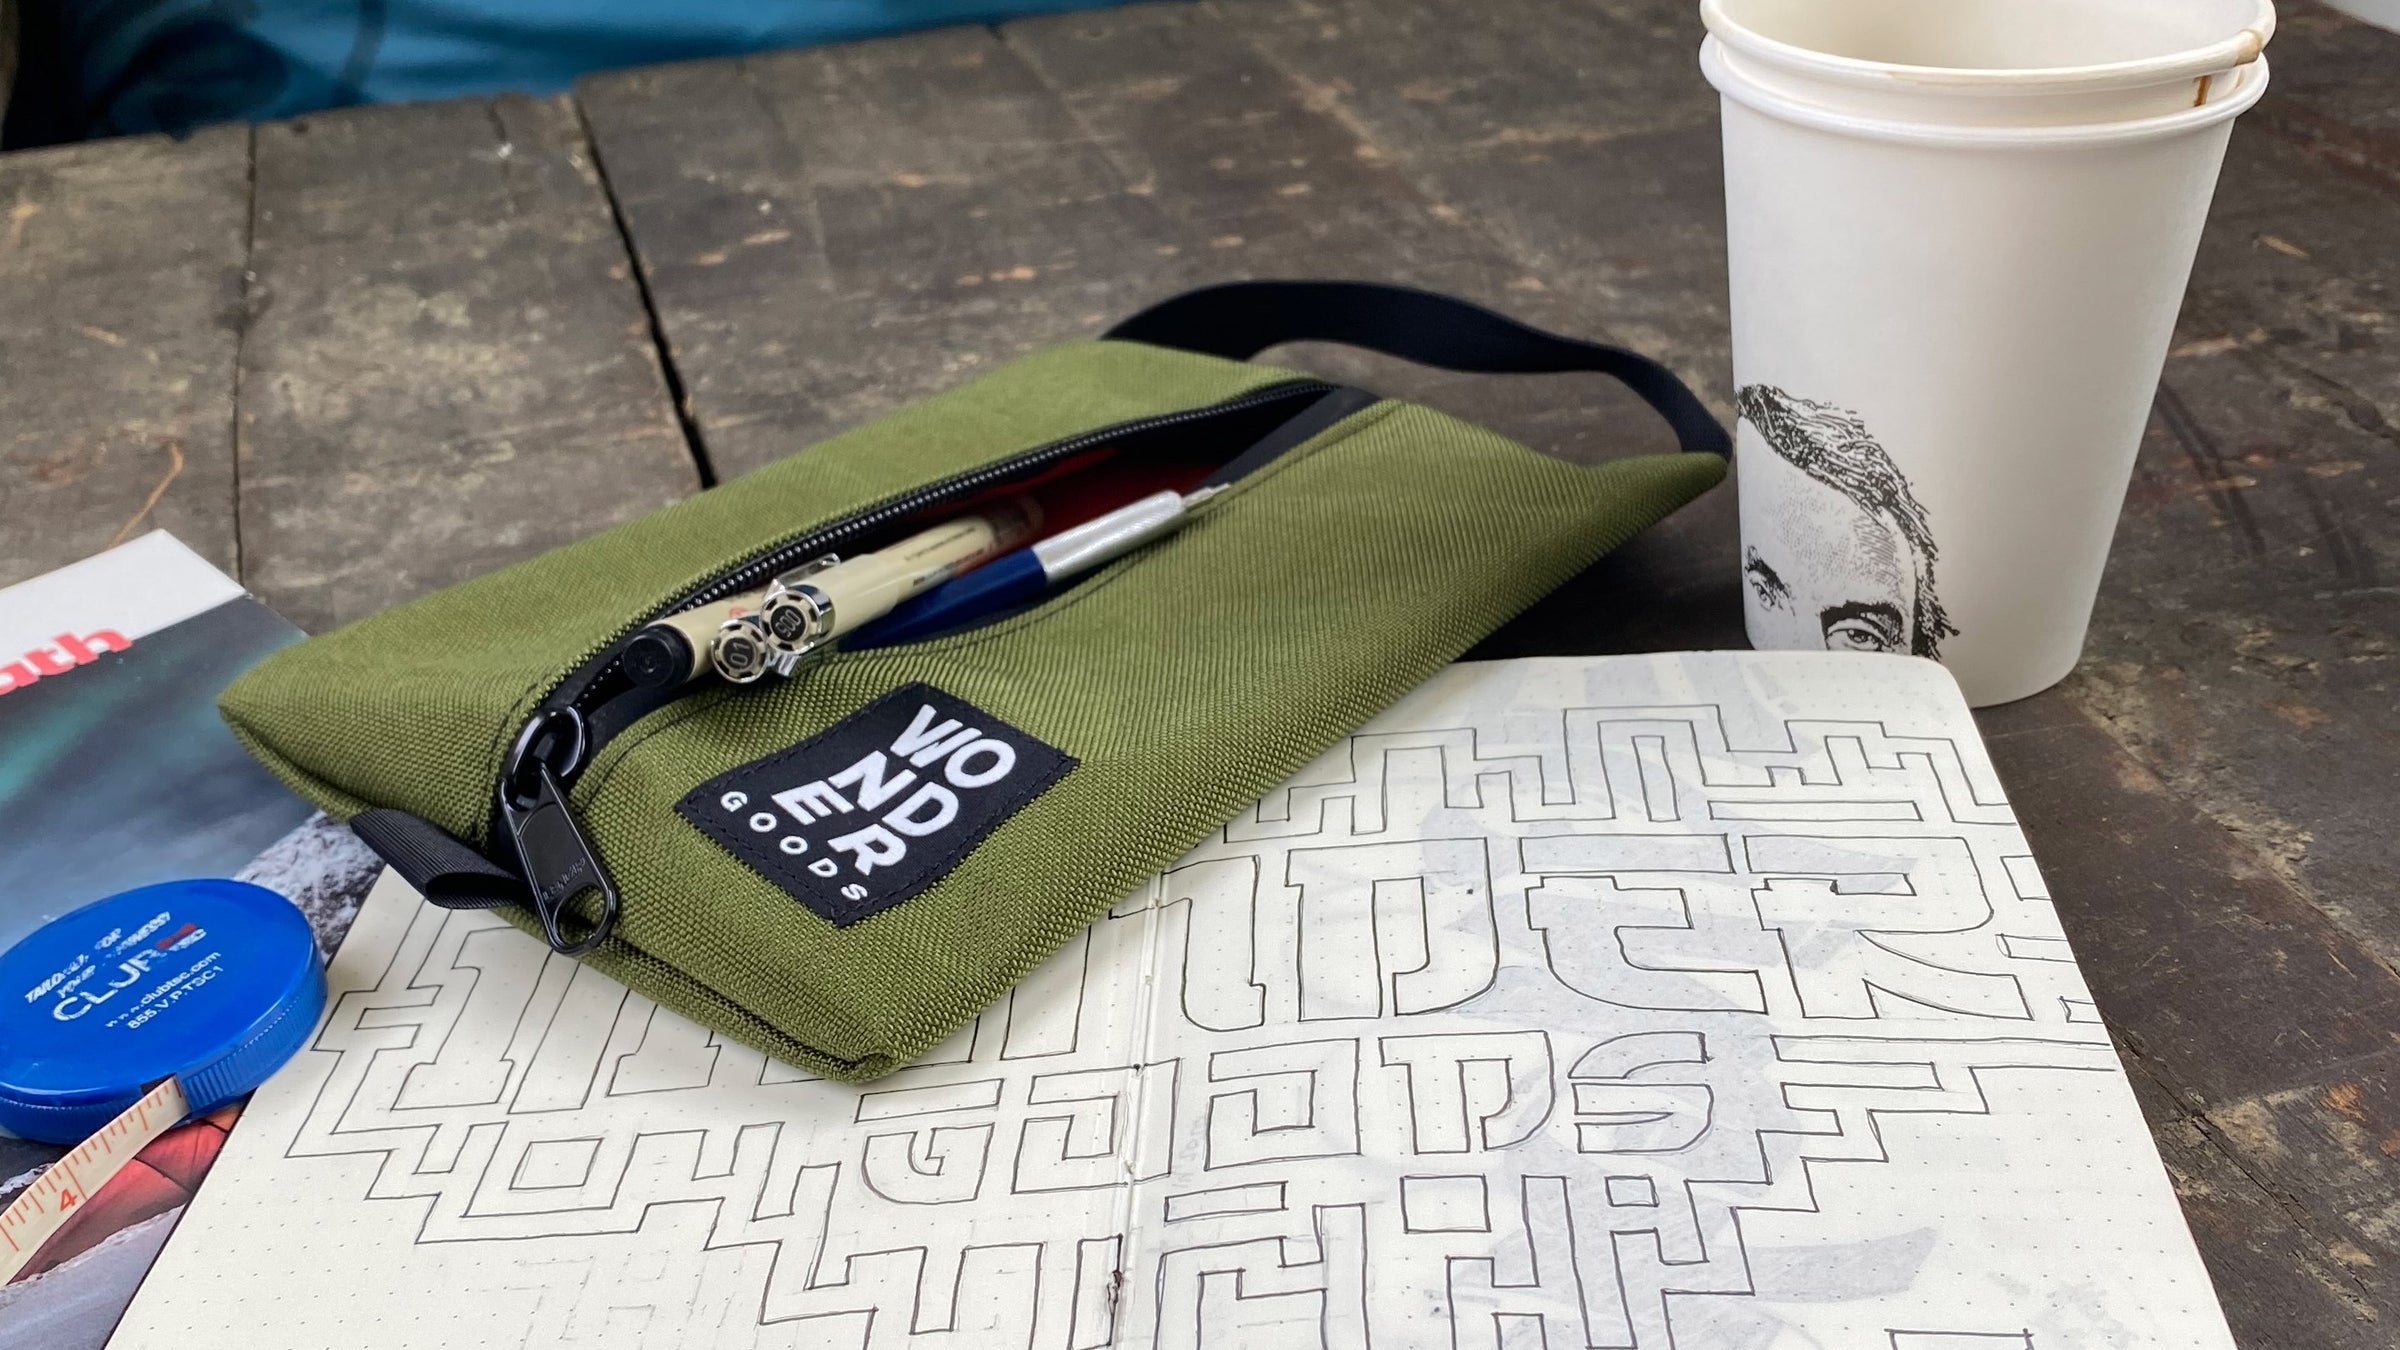 Large travel zipper pouch from Wonder Goods